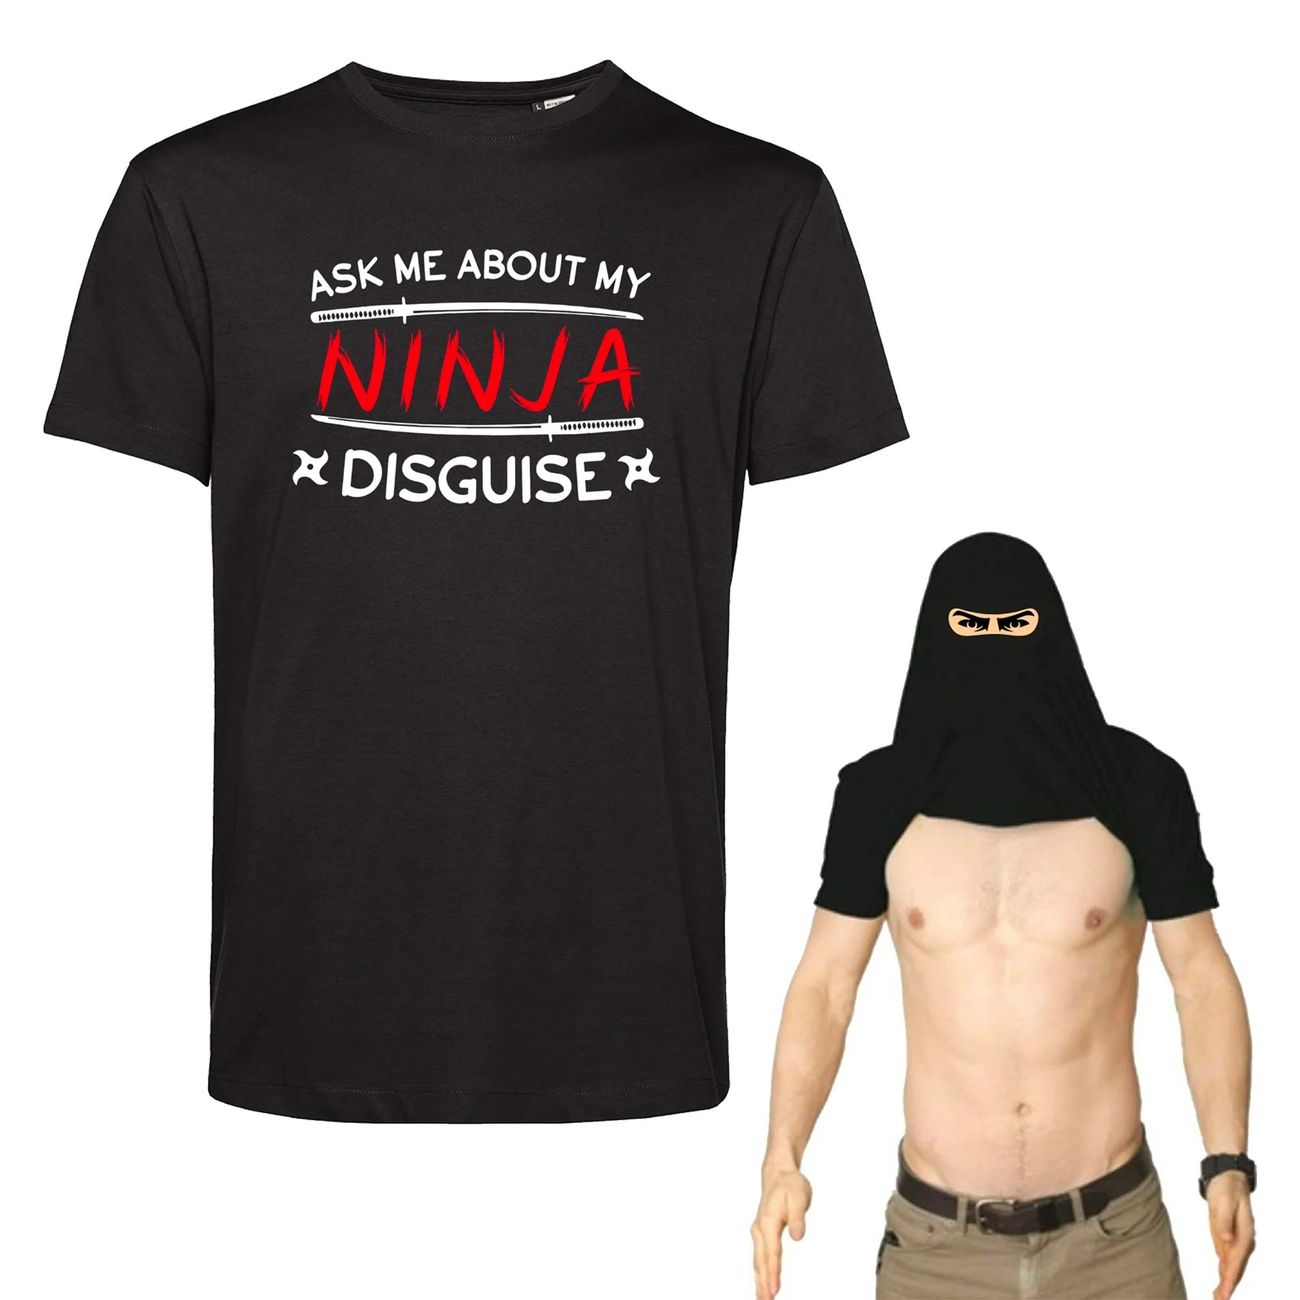 ask-me-about-my-ninja-disguise-t-shirt-94446-1